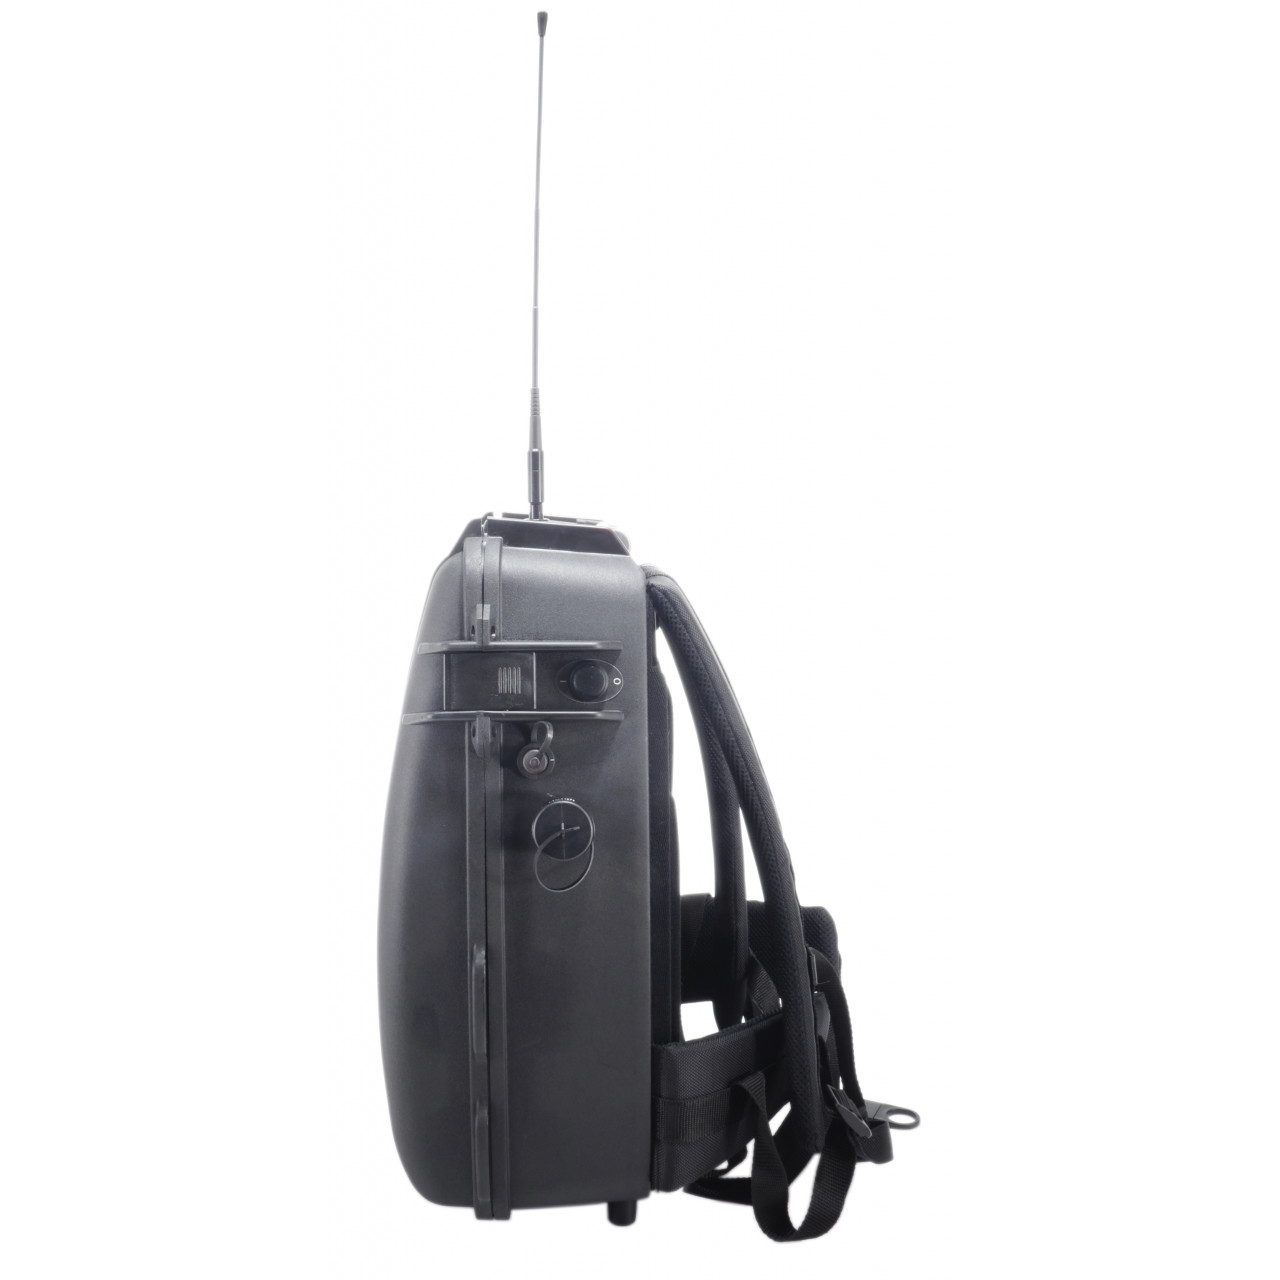 IF-BACKPACK-R6100 Repeaters - ICOM